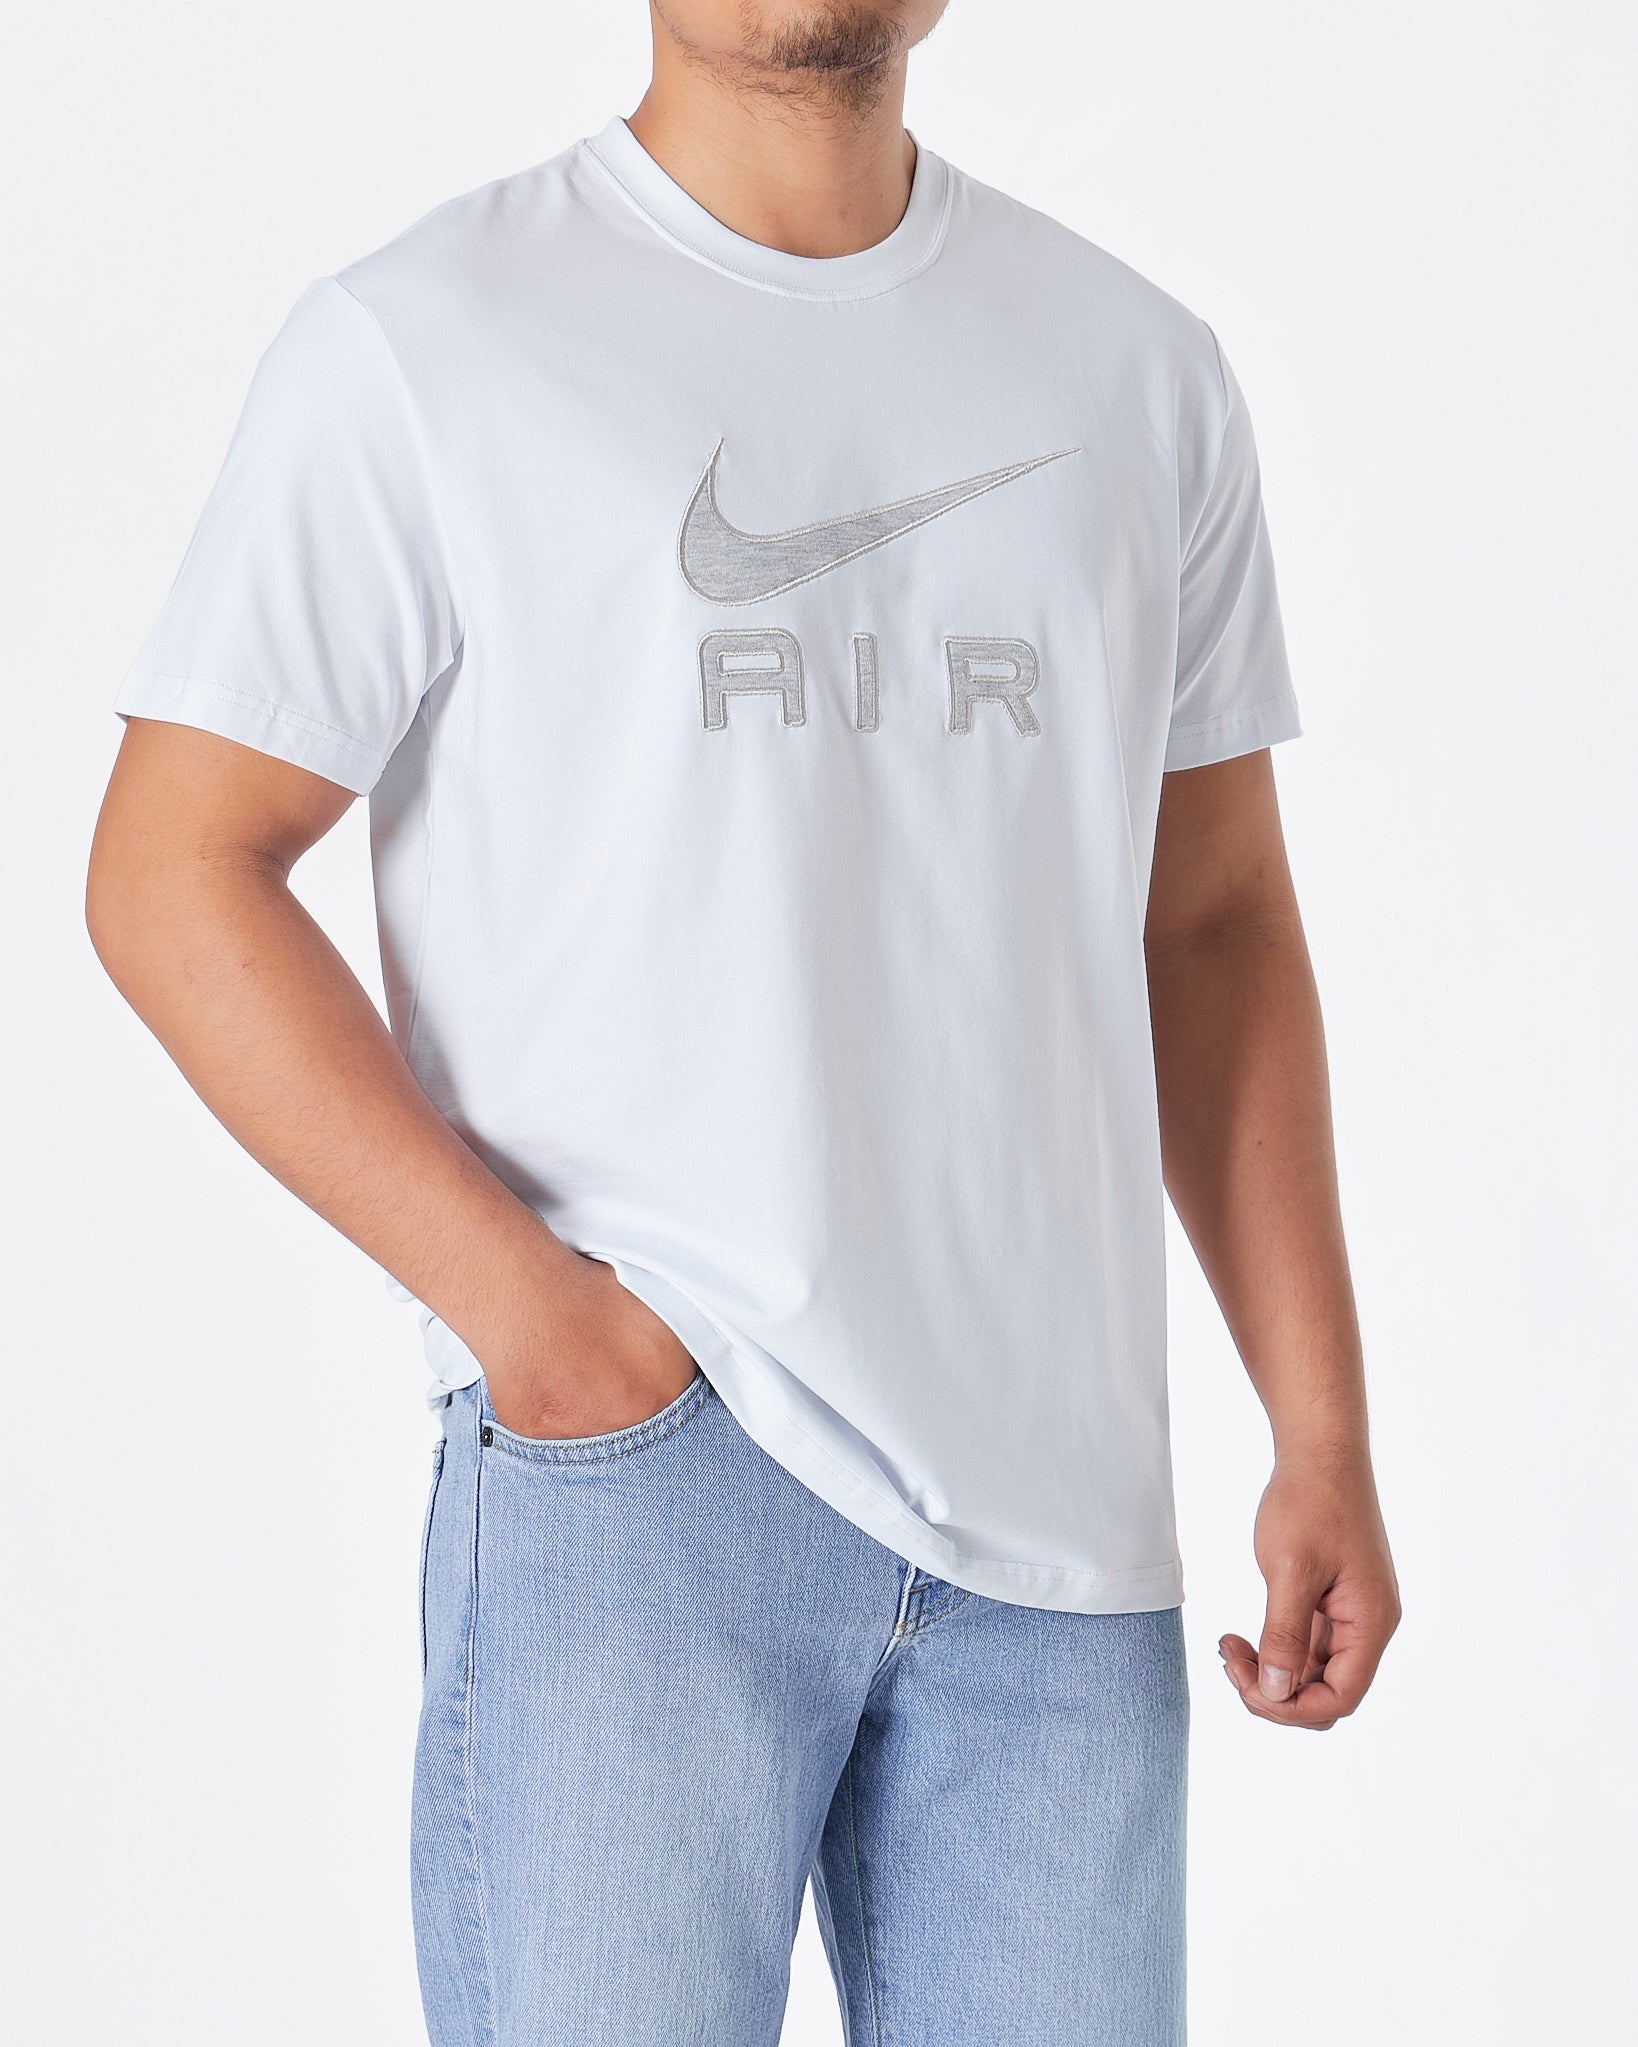 MOI OUTFIT-NIK Air Embroidered Men White T-Shirt 16.90